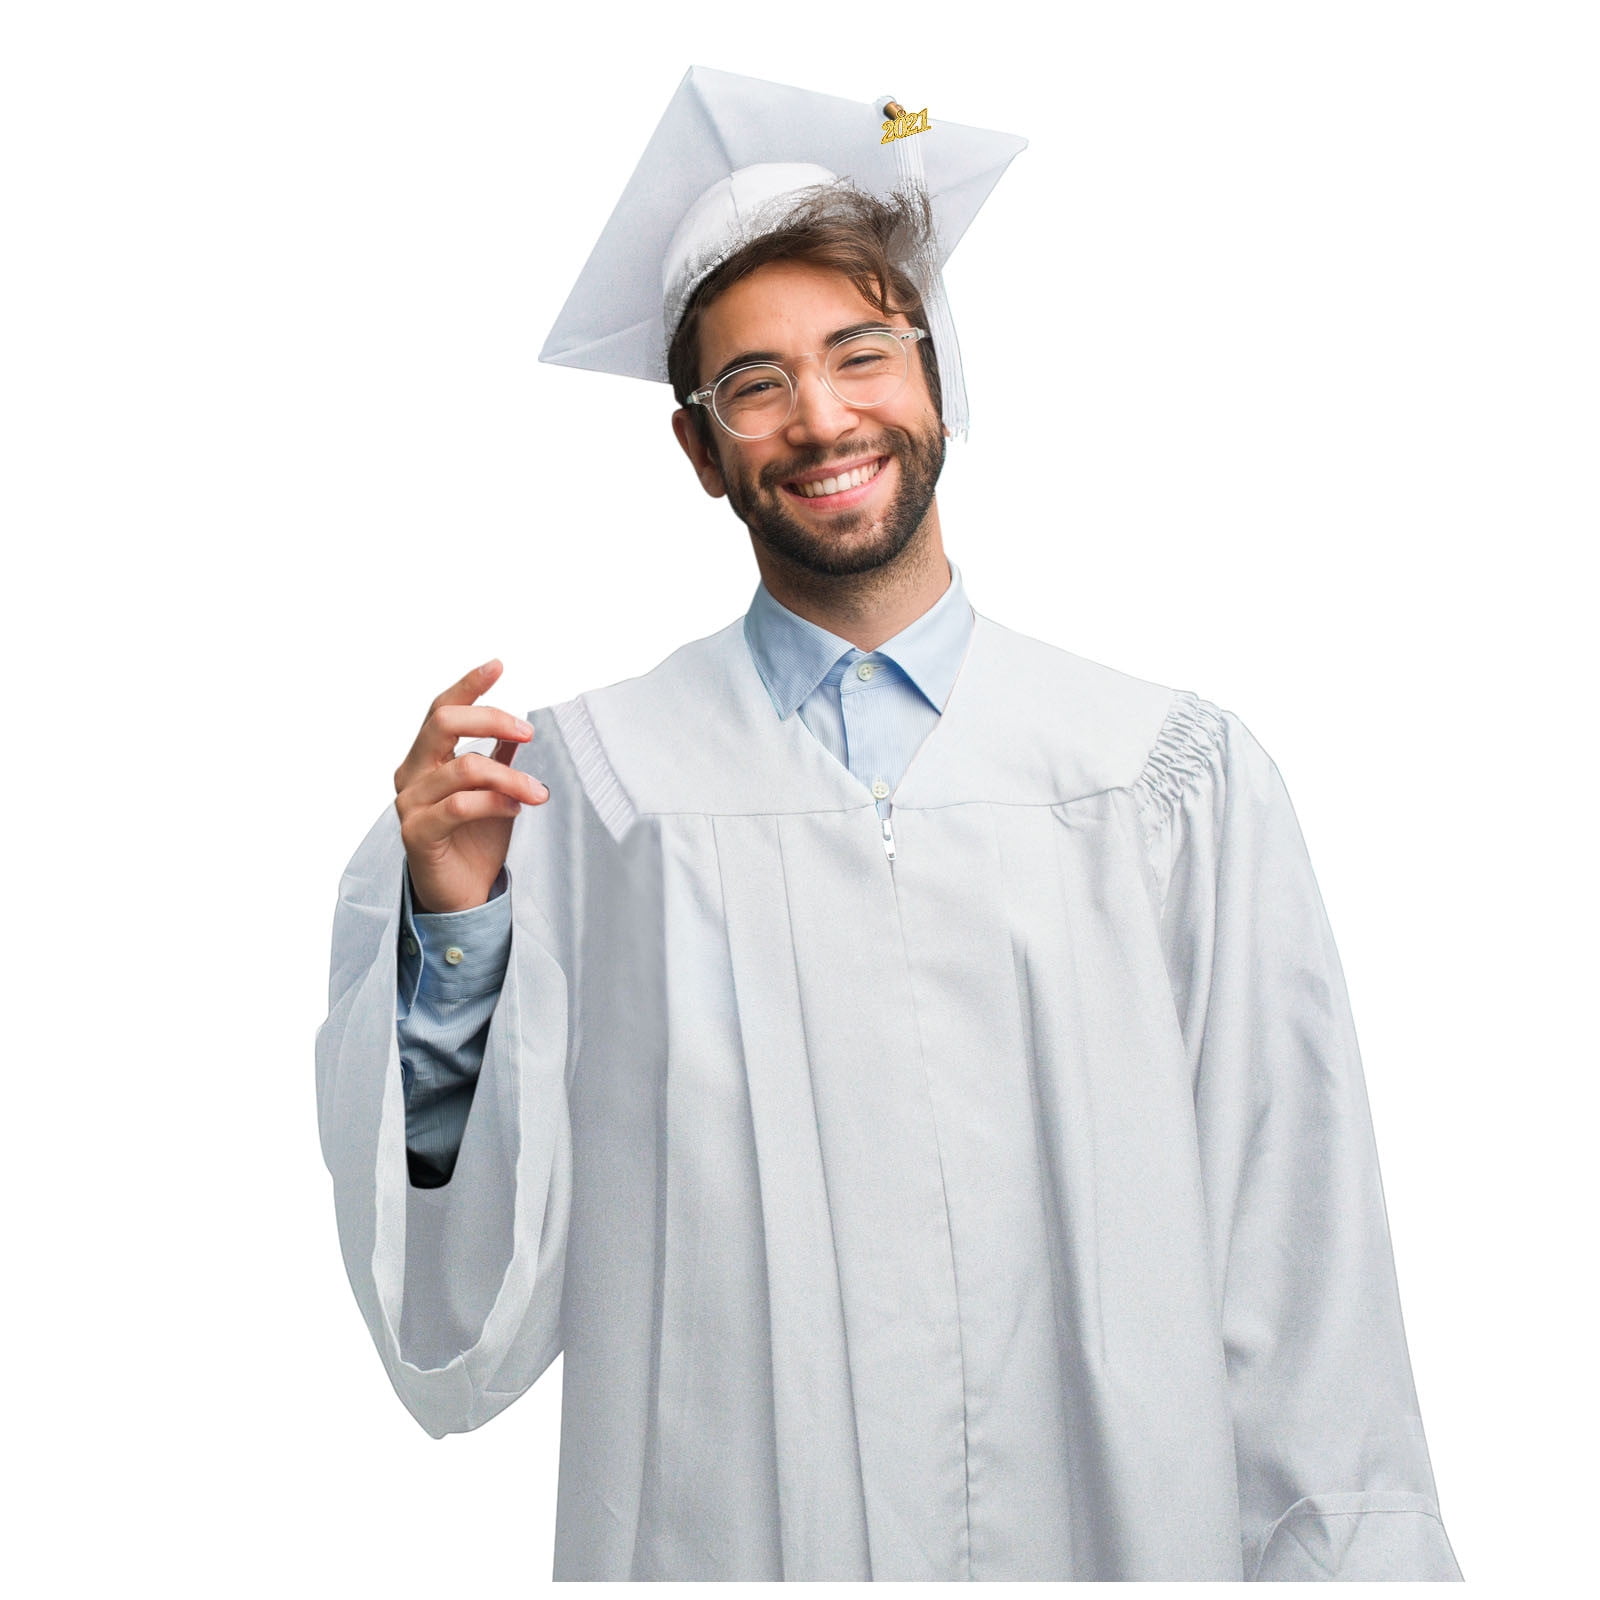 Graduation Cap and Gown: Perfect Guide On What Attire To Wear!